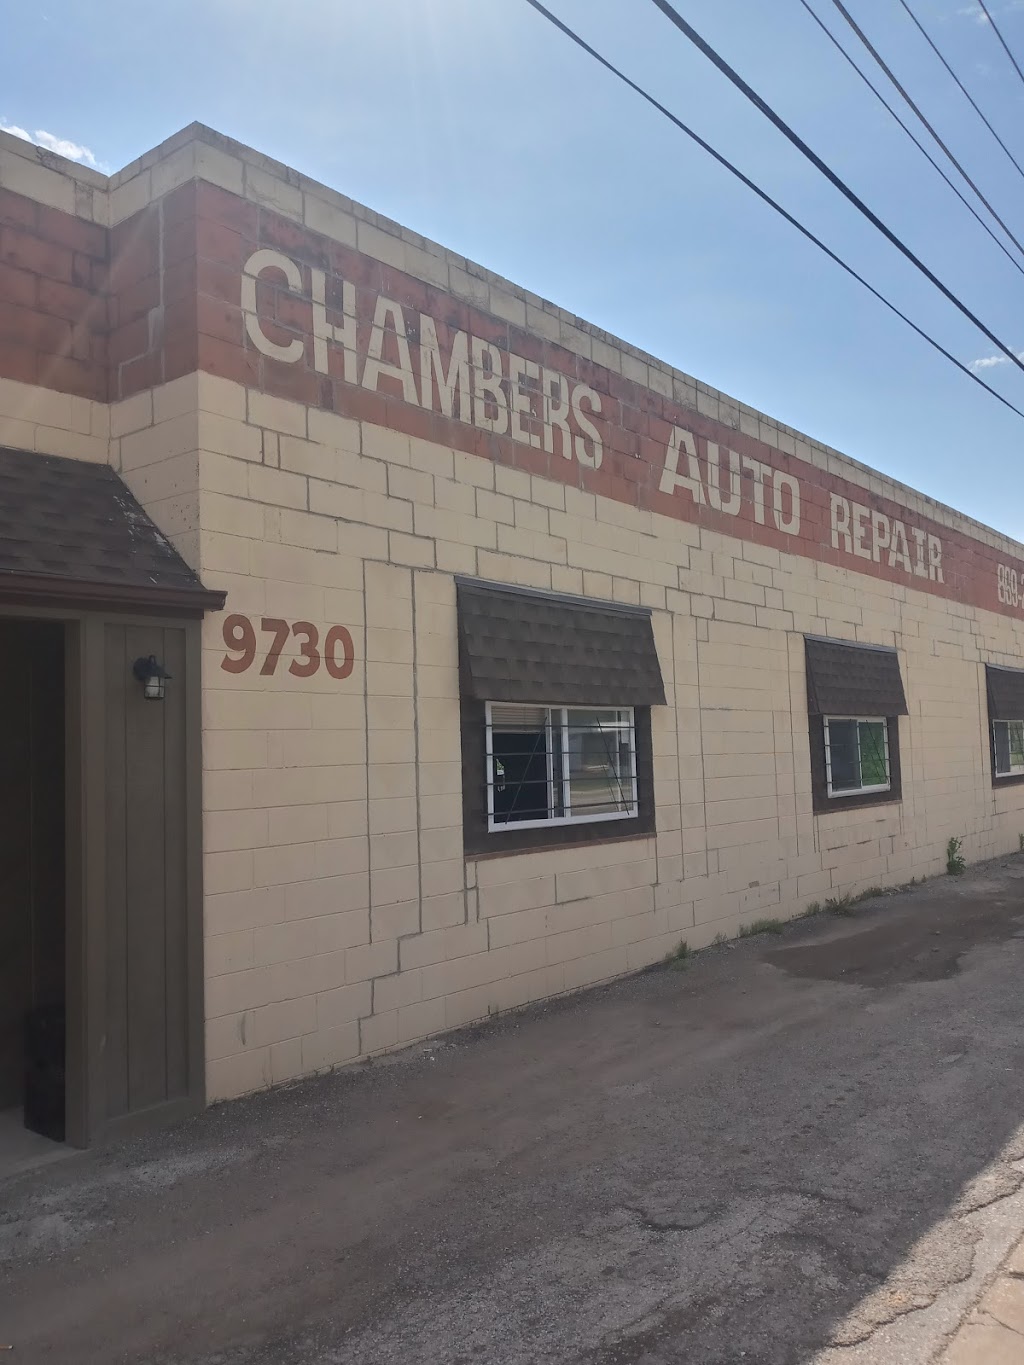 Chambers Auto Repair | 9730 Halls Ferry Road, St. Louis, MO 63136, USA | Phone: (314) 869-2990